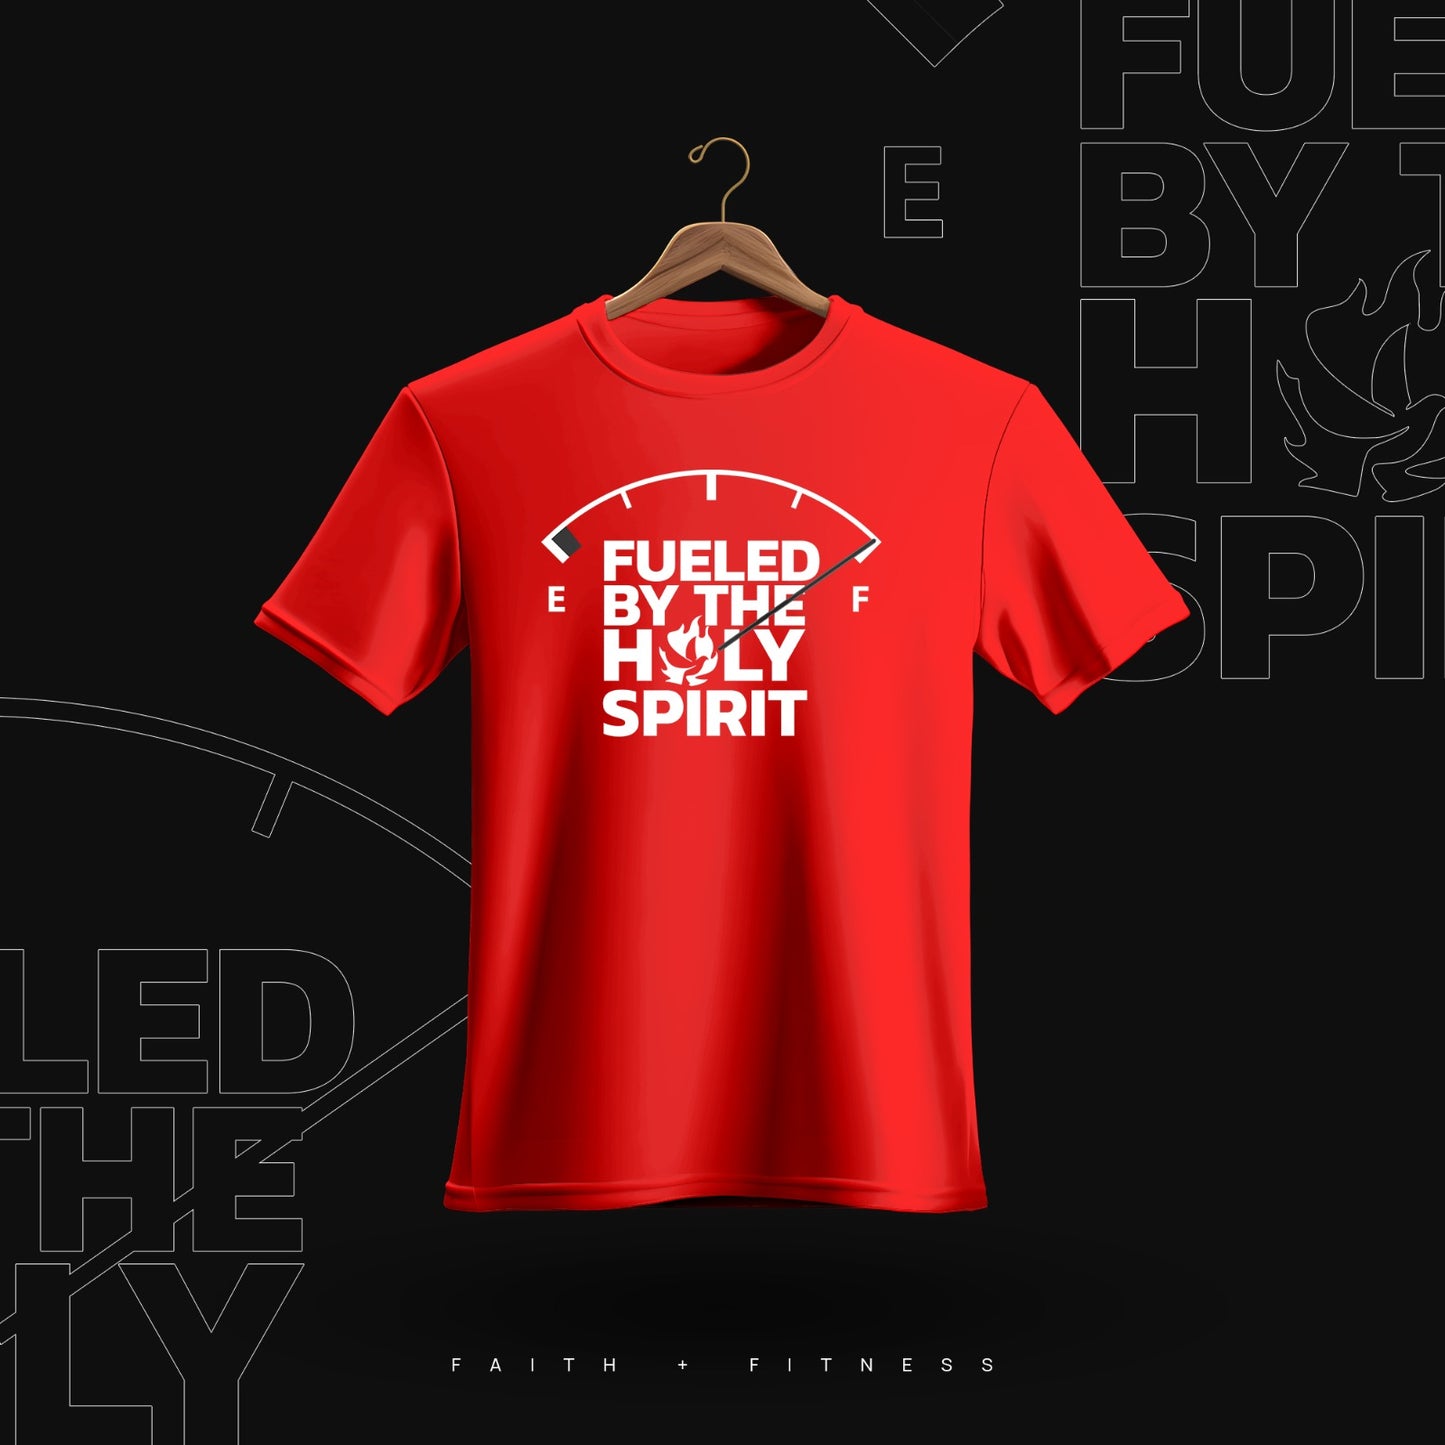 Fueled by the Holy Spirit Round Tee